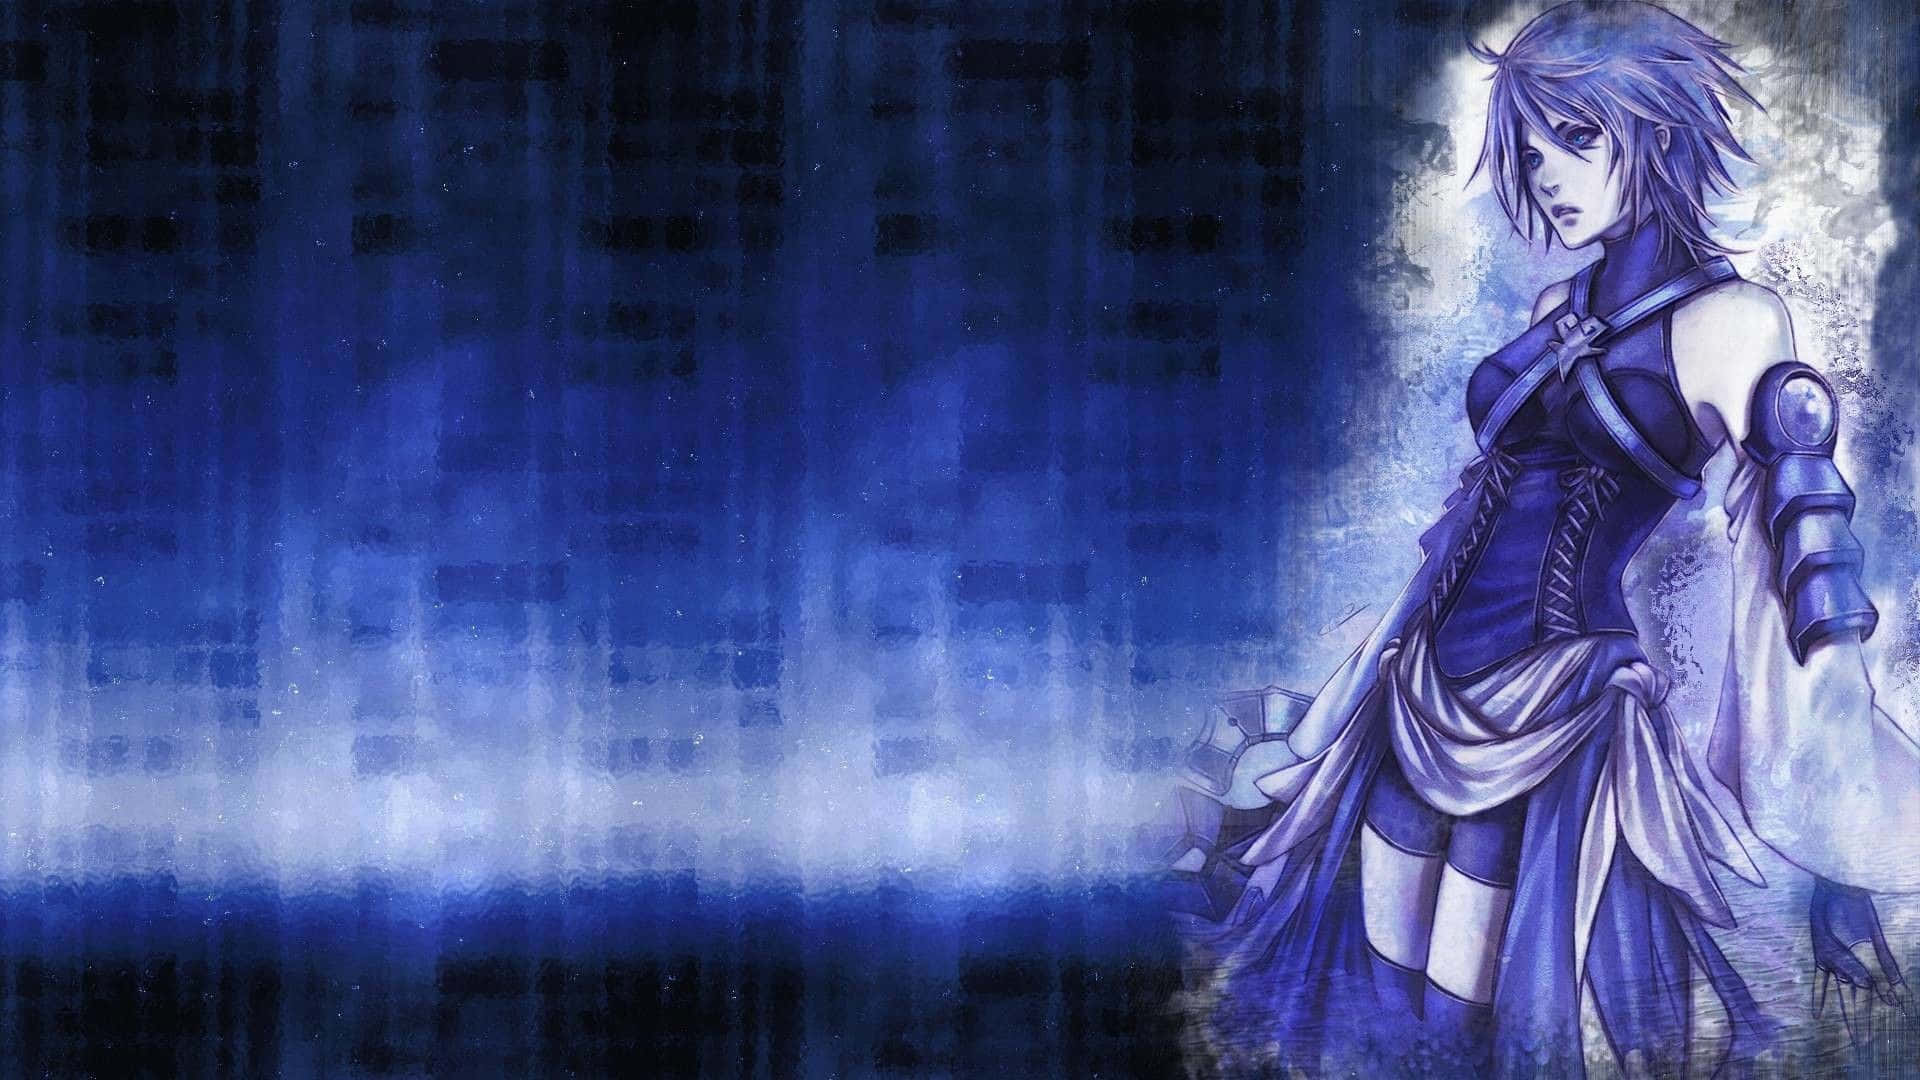 "The brave and resourceful Aqua, from the beloved Kingdom Hearts franchise" Wallpaper